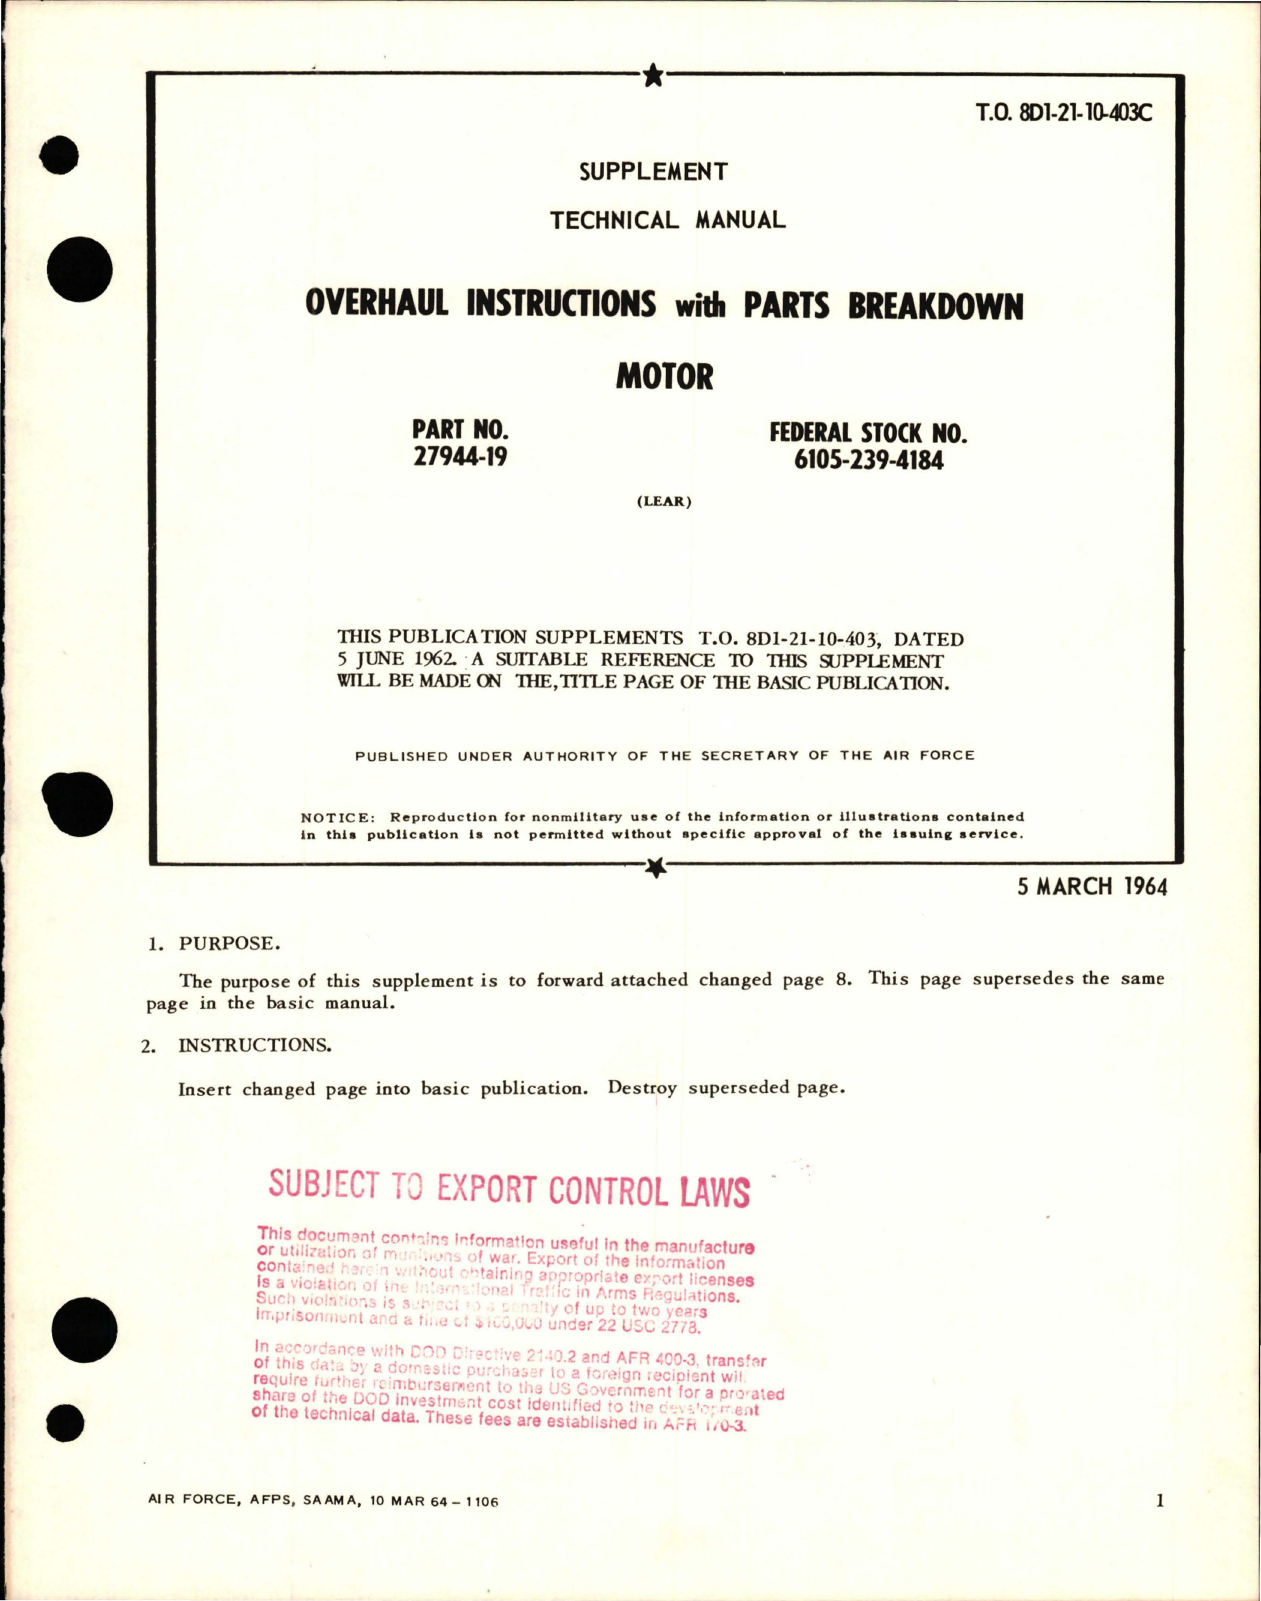 Sample page 1 from AirCorps Library document: Supplement to Overhaul Instructions with Parts Breakdown for Motor - Part 27944-19 